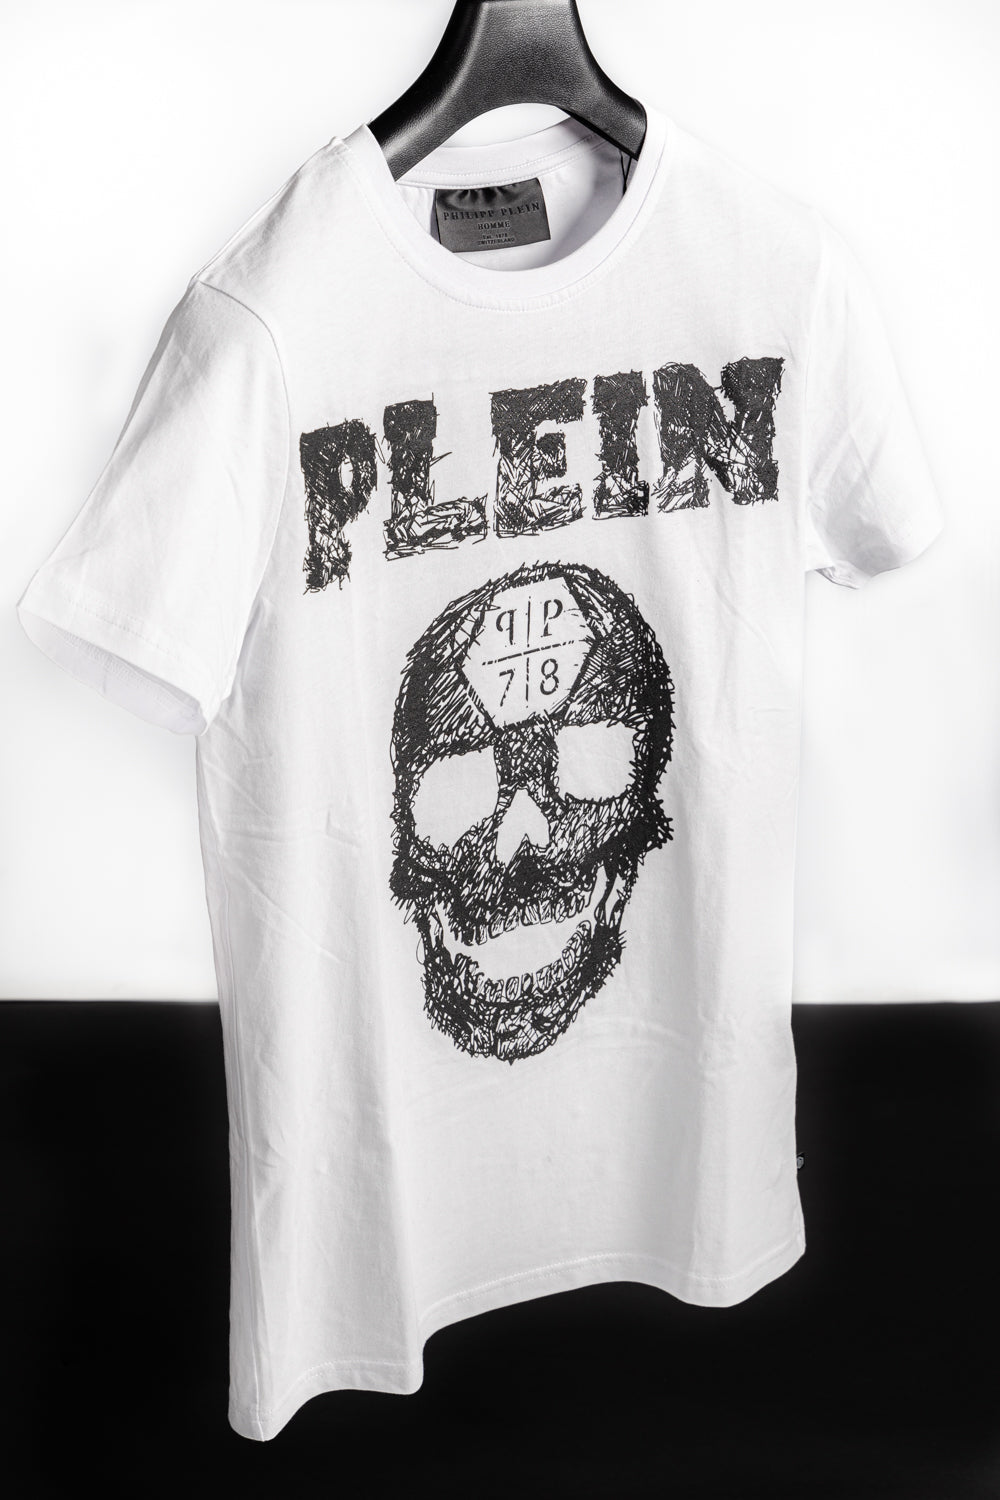 Philipp Plein SS Skull T-shirt - Brands Off - Buy Online Luxury Clothing - Fashion Online Shop - Outlet Price